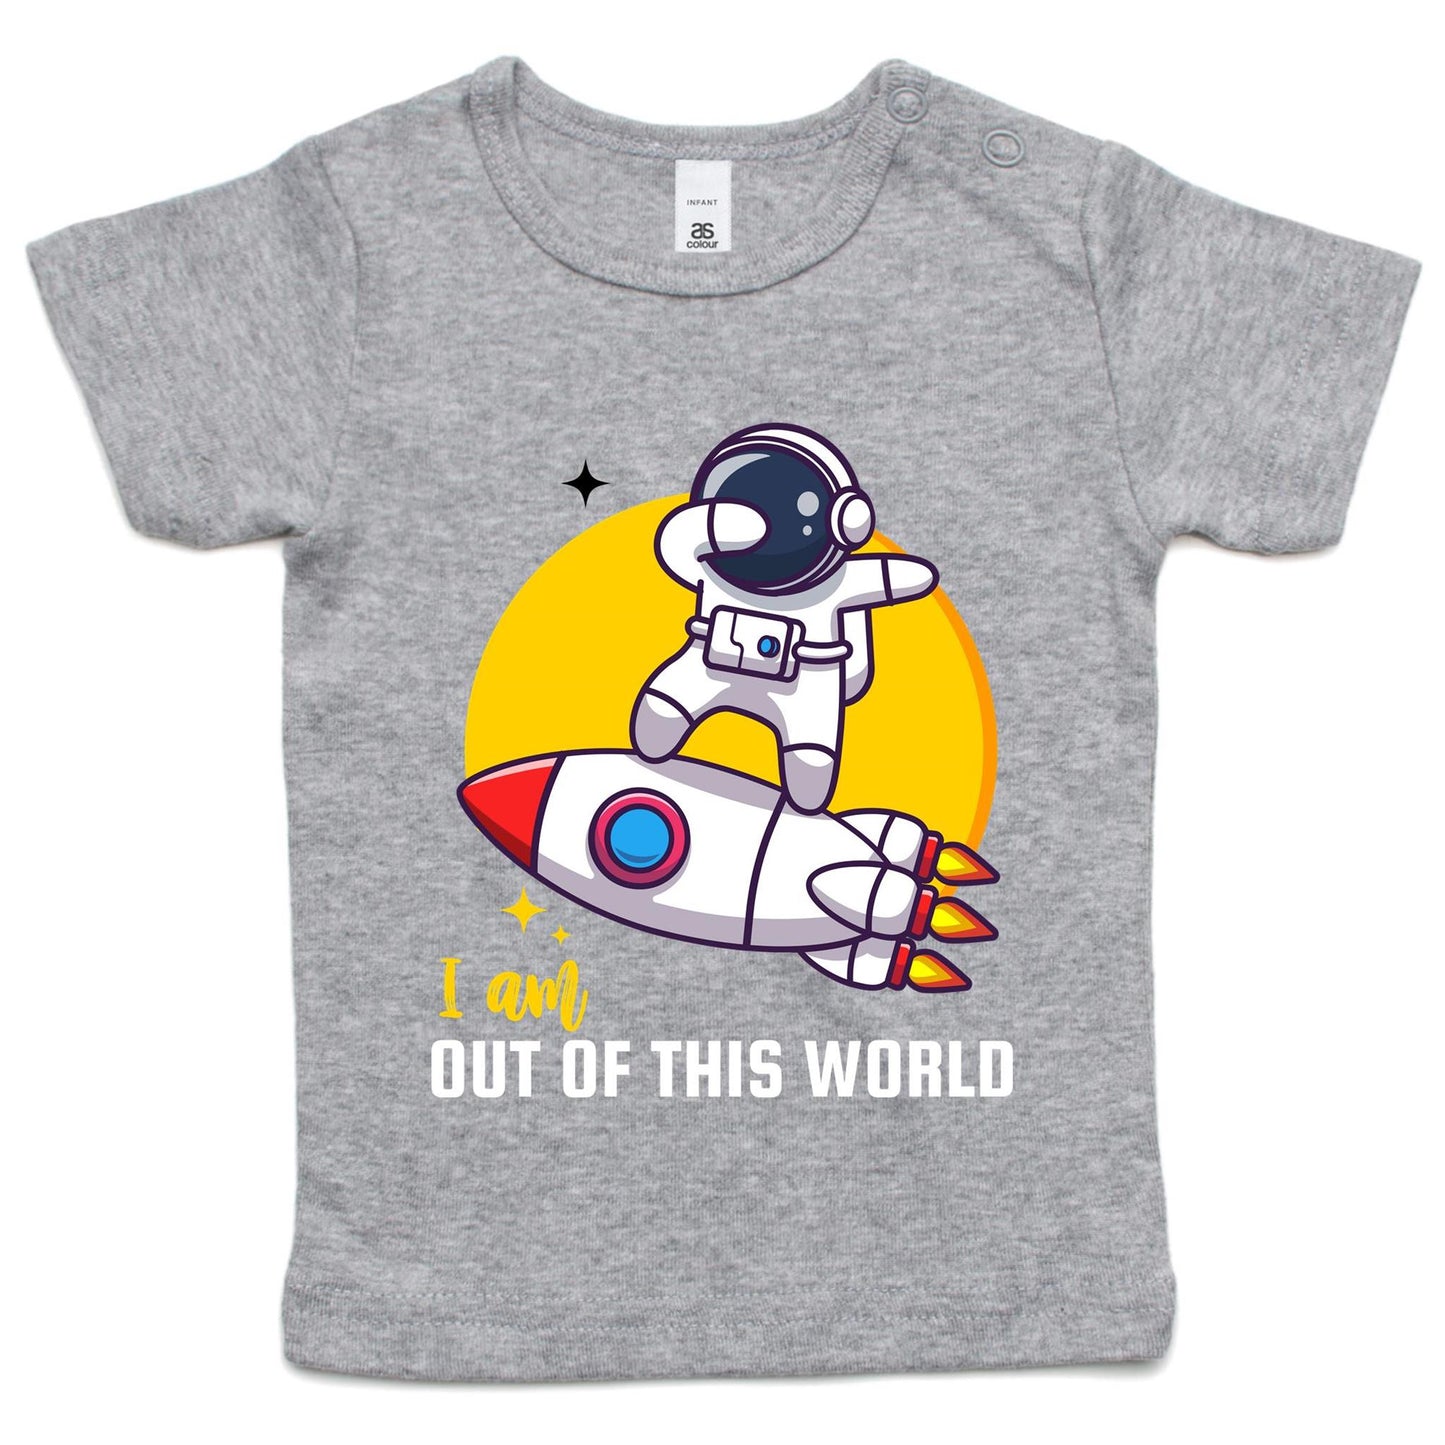 I Am Out Of This World - Baby T-shirt Grey Marle Baby T-shirt Space